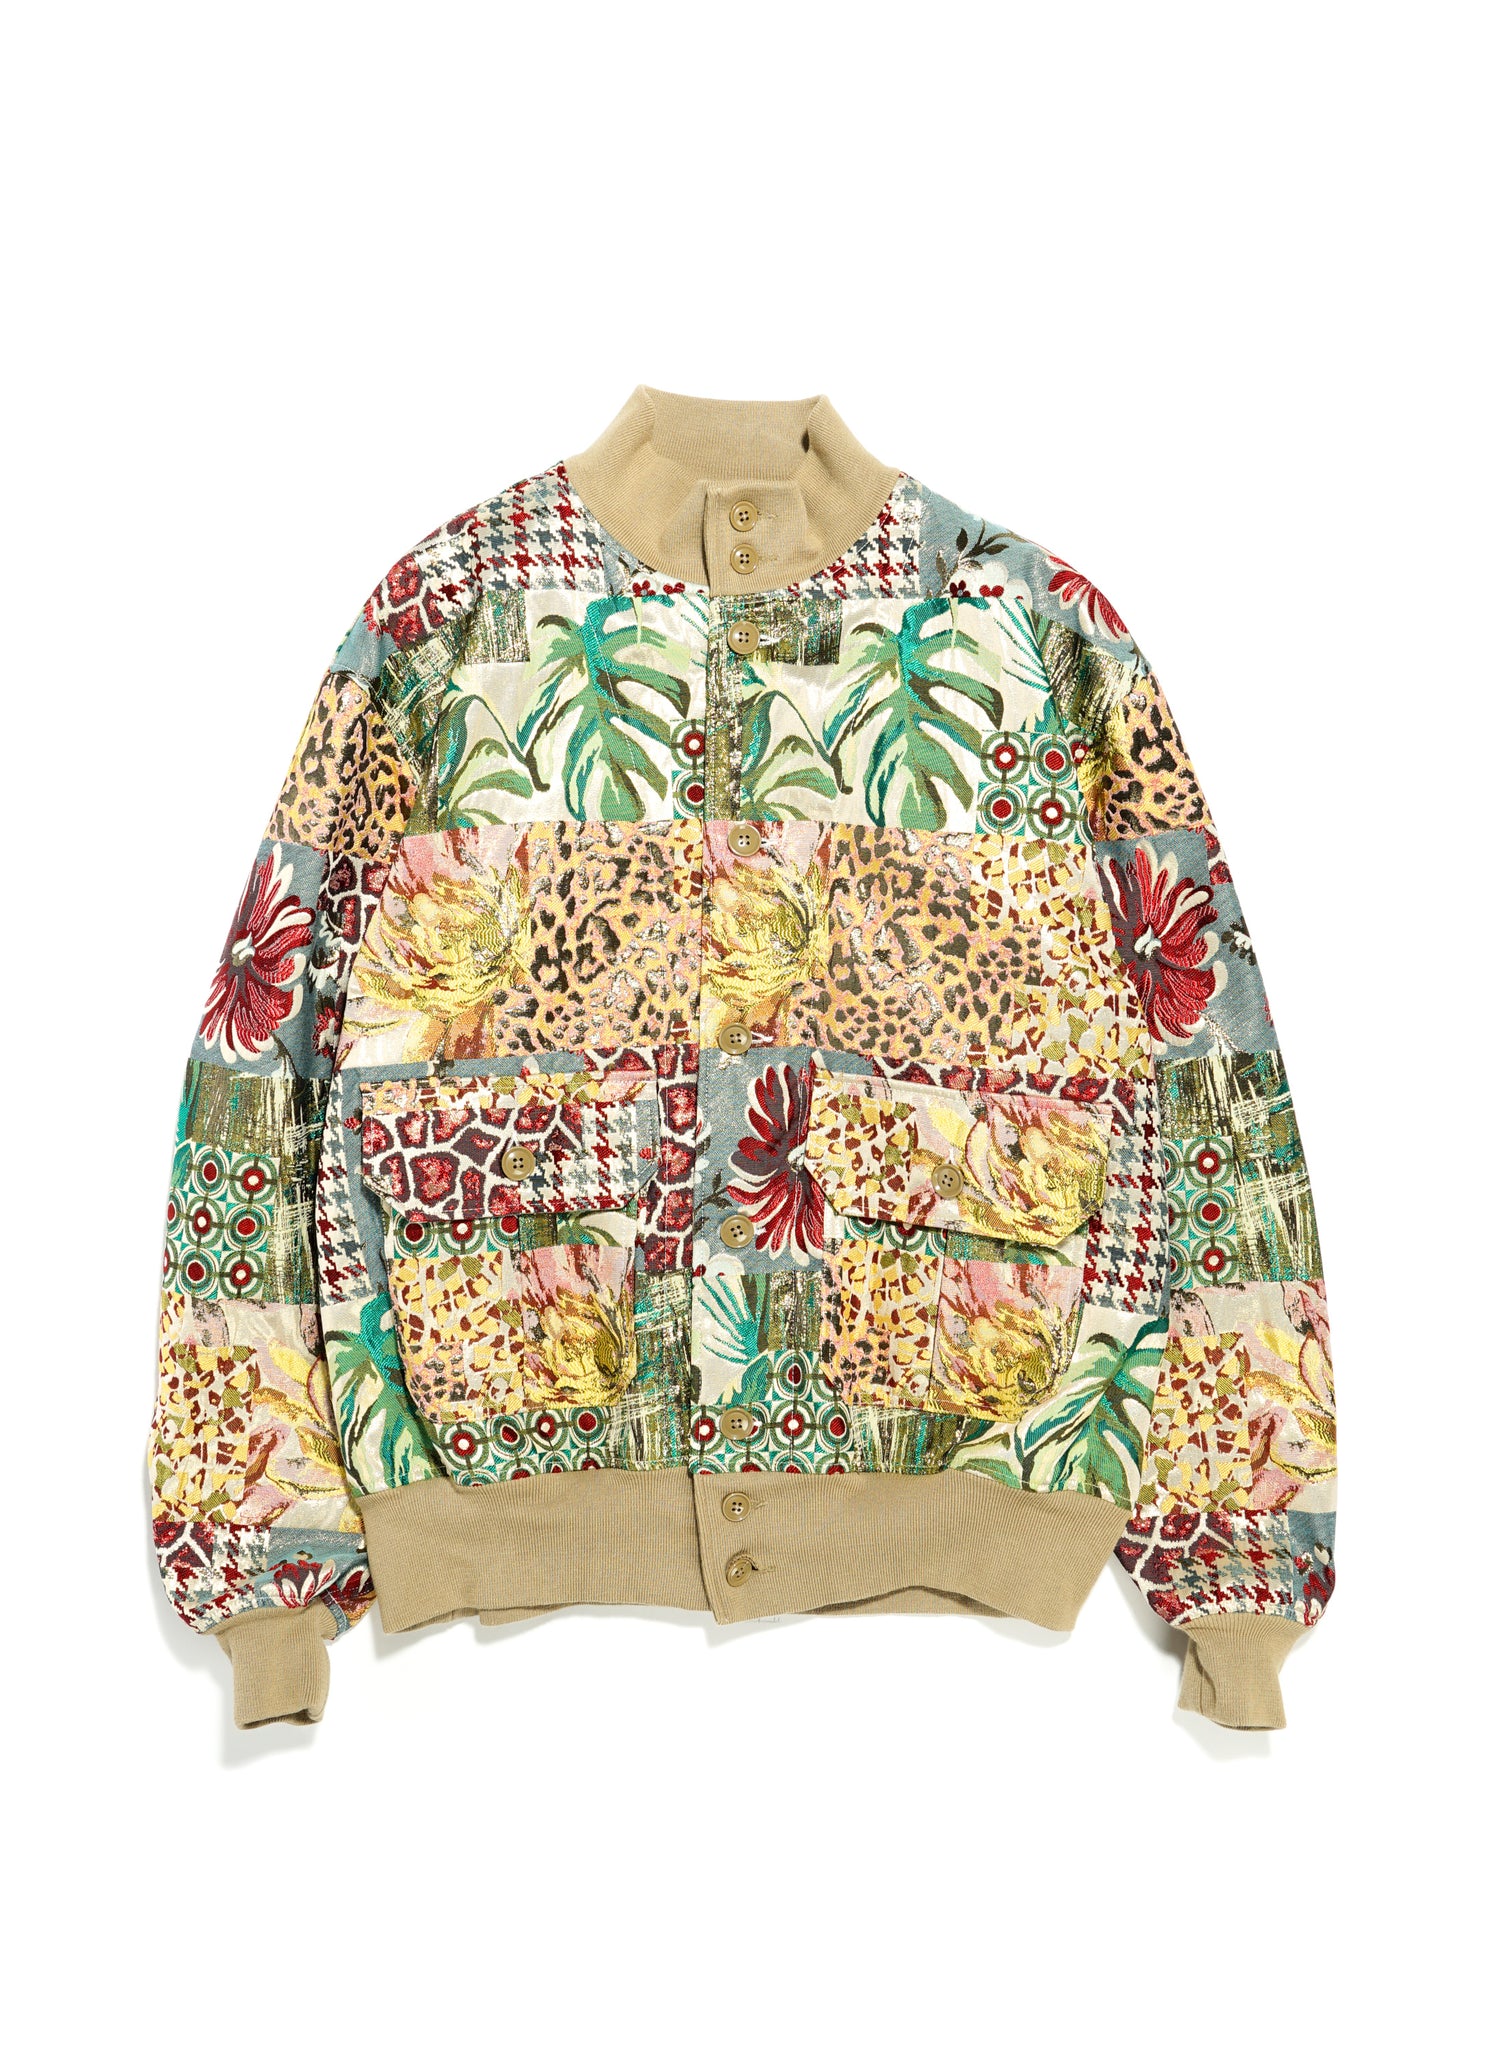 ENGINEERED GARMENTS A-1 JACKET - MULTI COLOR POLY ACETATE LUREX JACQUARD